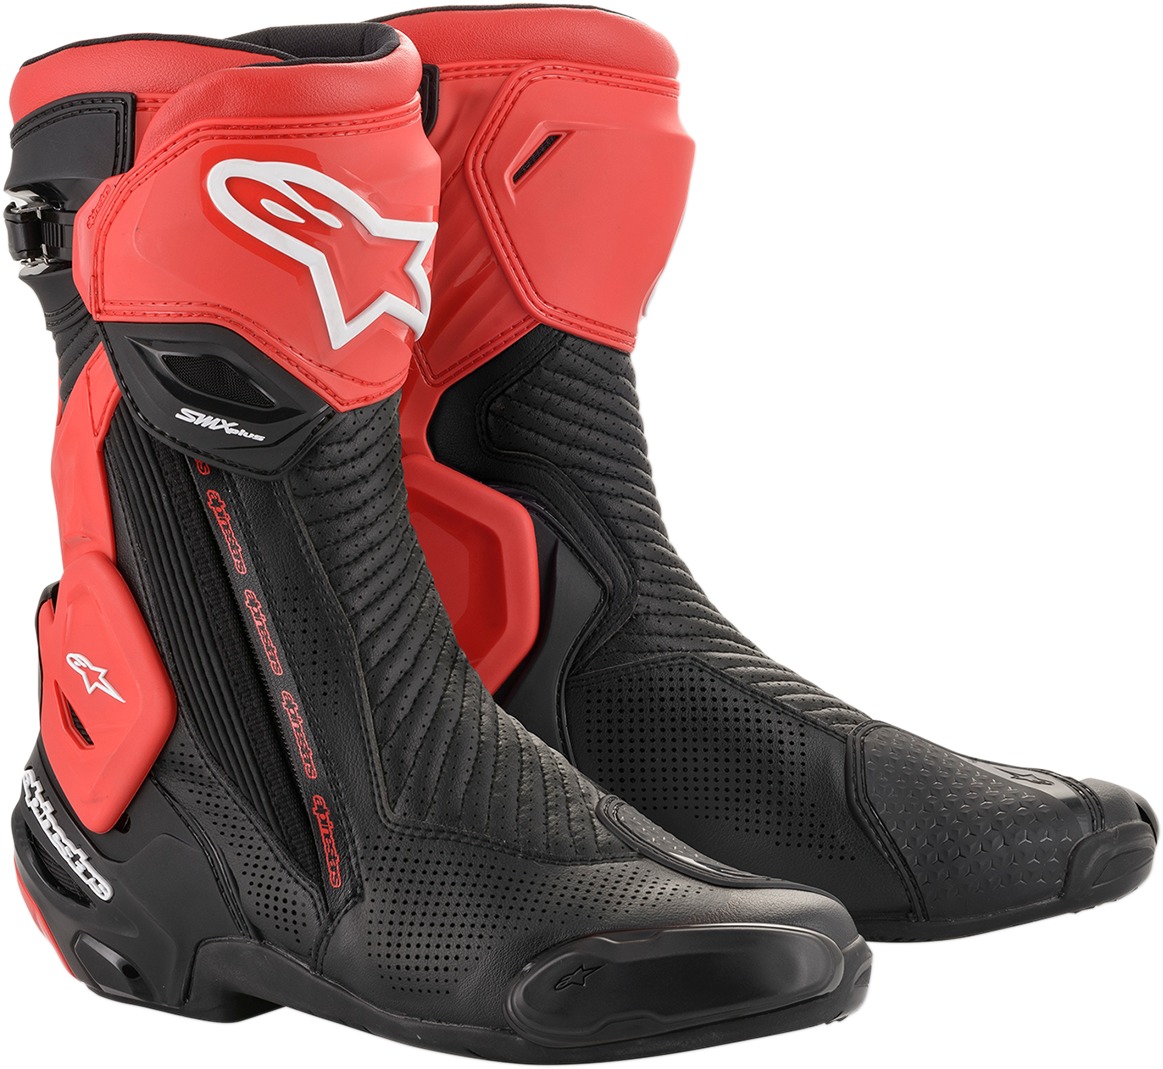 SMX Plus Street Riding Boots Black/Red US 10.5 - Click Image to Close